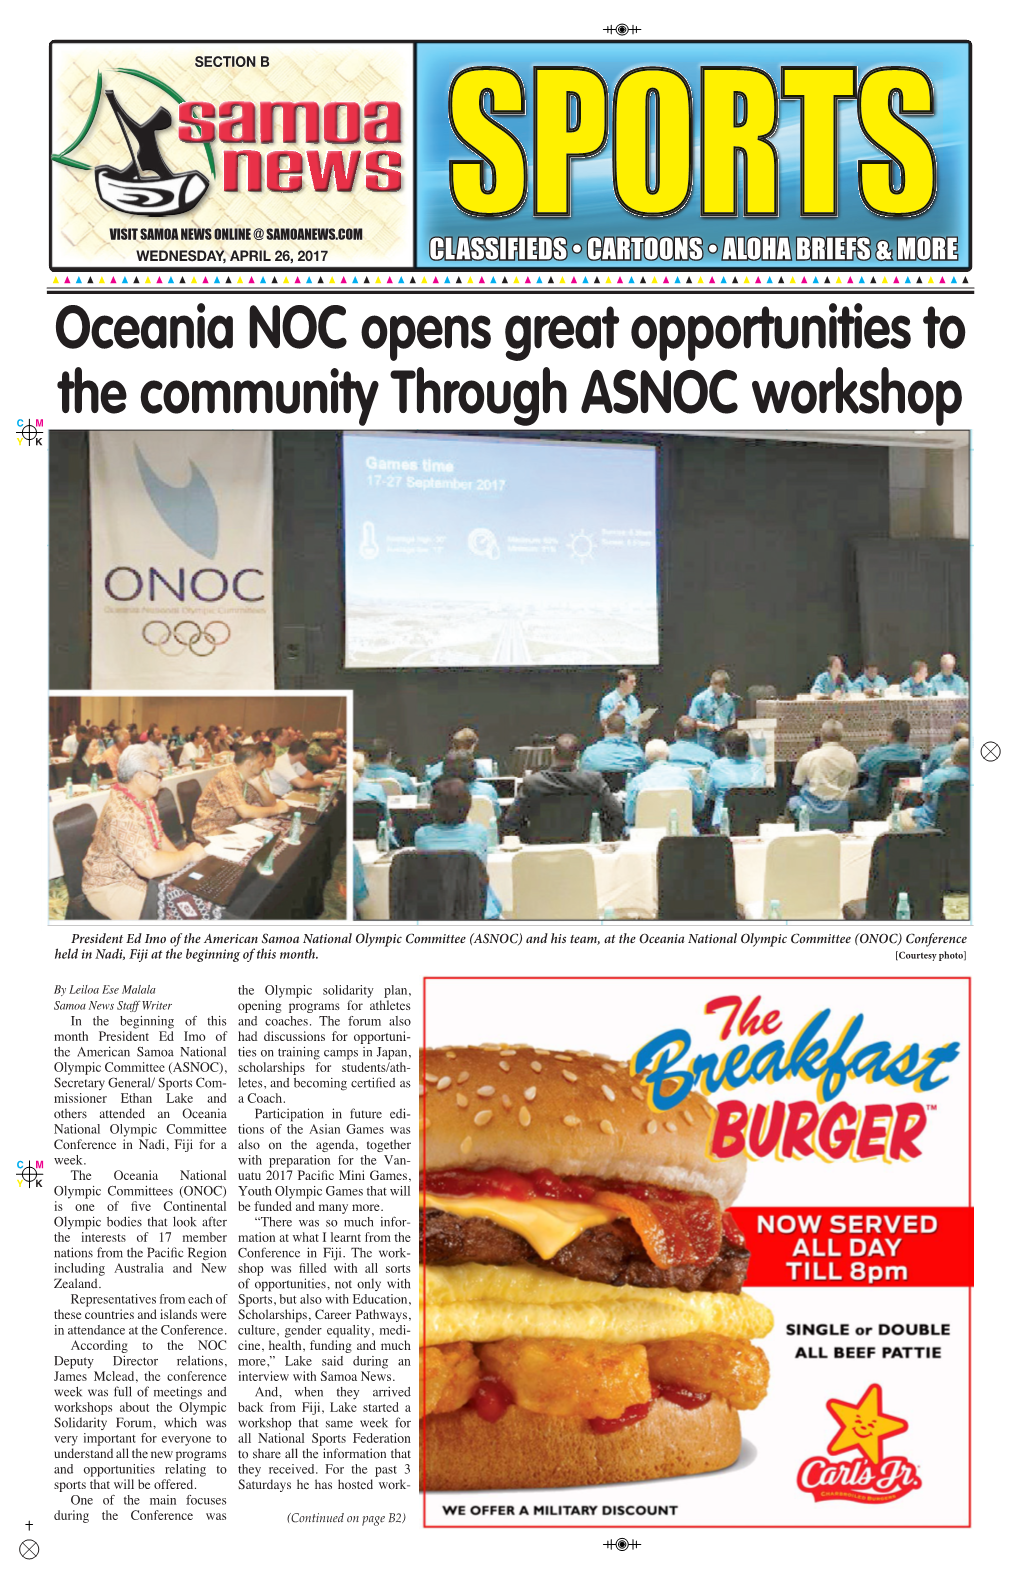 Oceania NOC Opens Great Opportunities to the Community Through ASNOC Workshop C M Y K